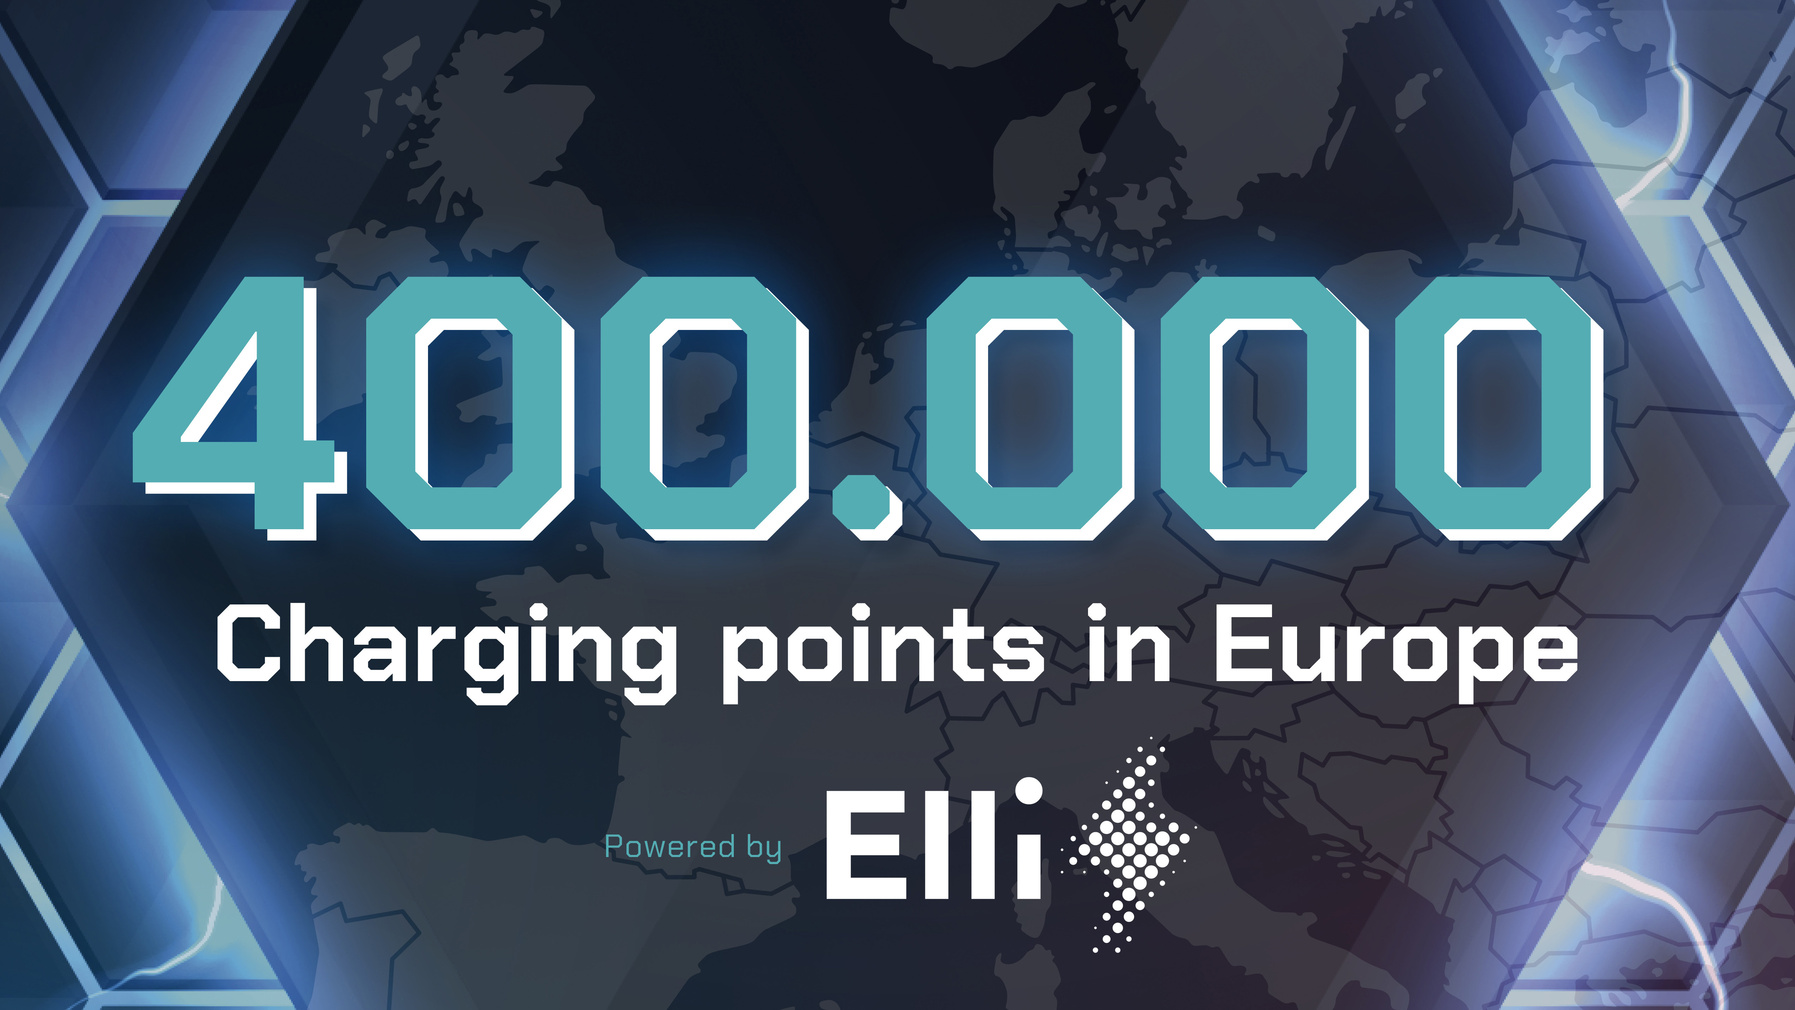 Volkswagen AG creates the largest charging network in Europe wit